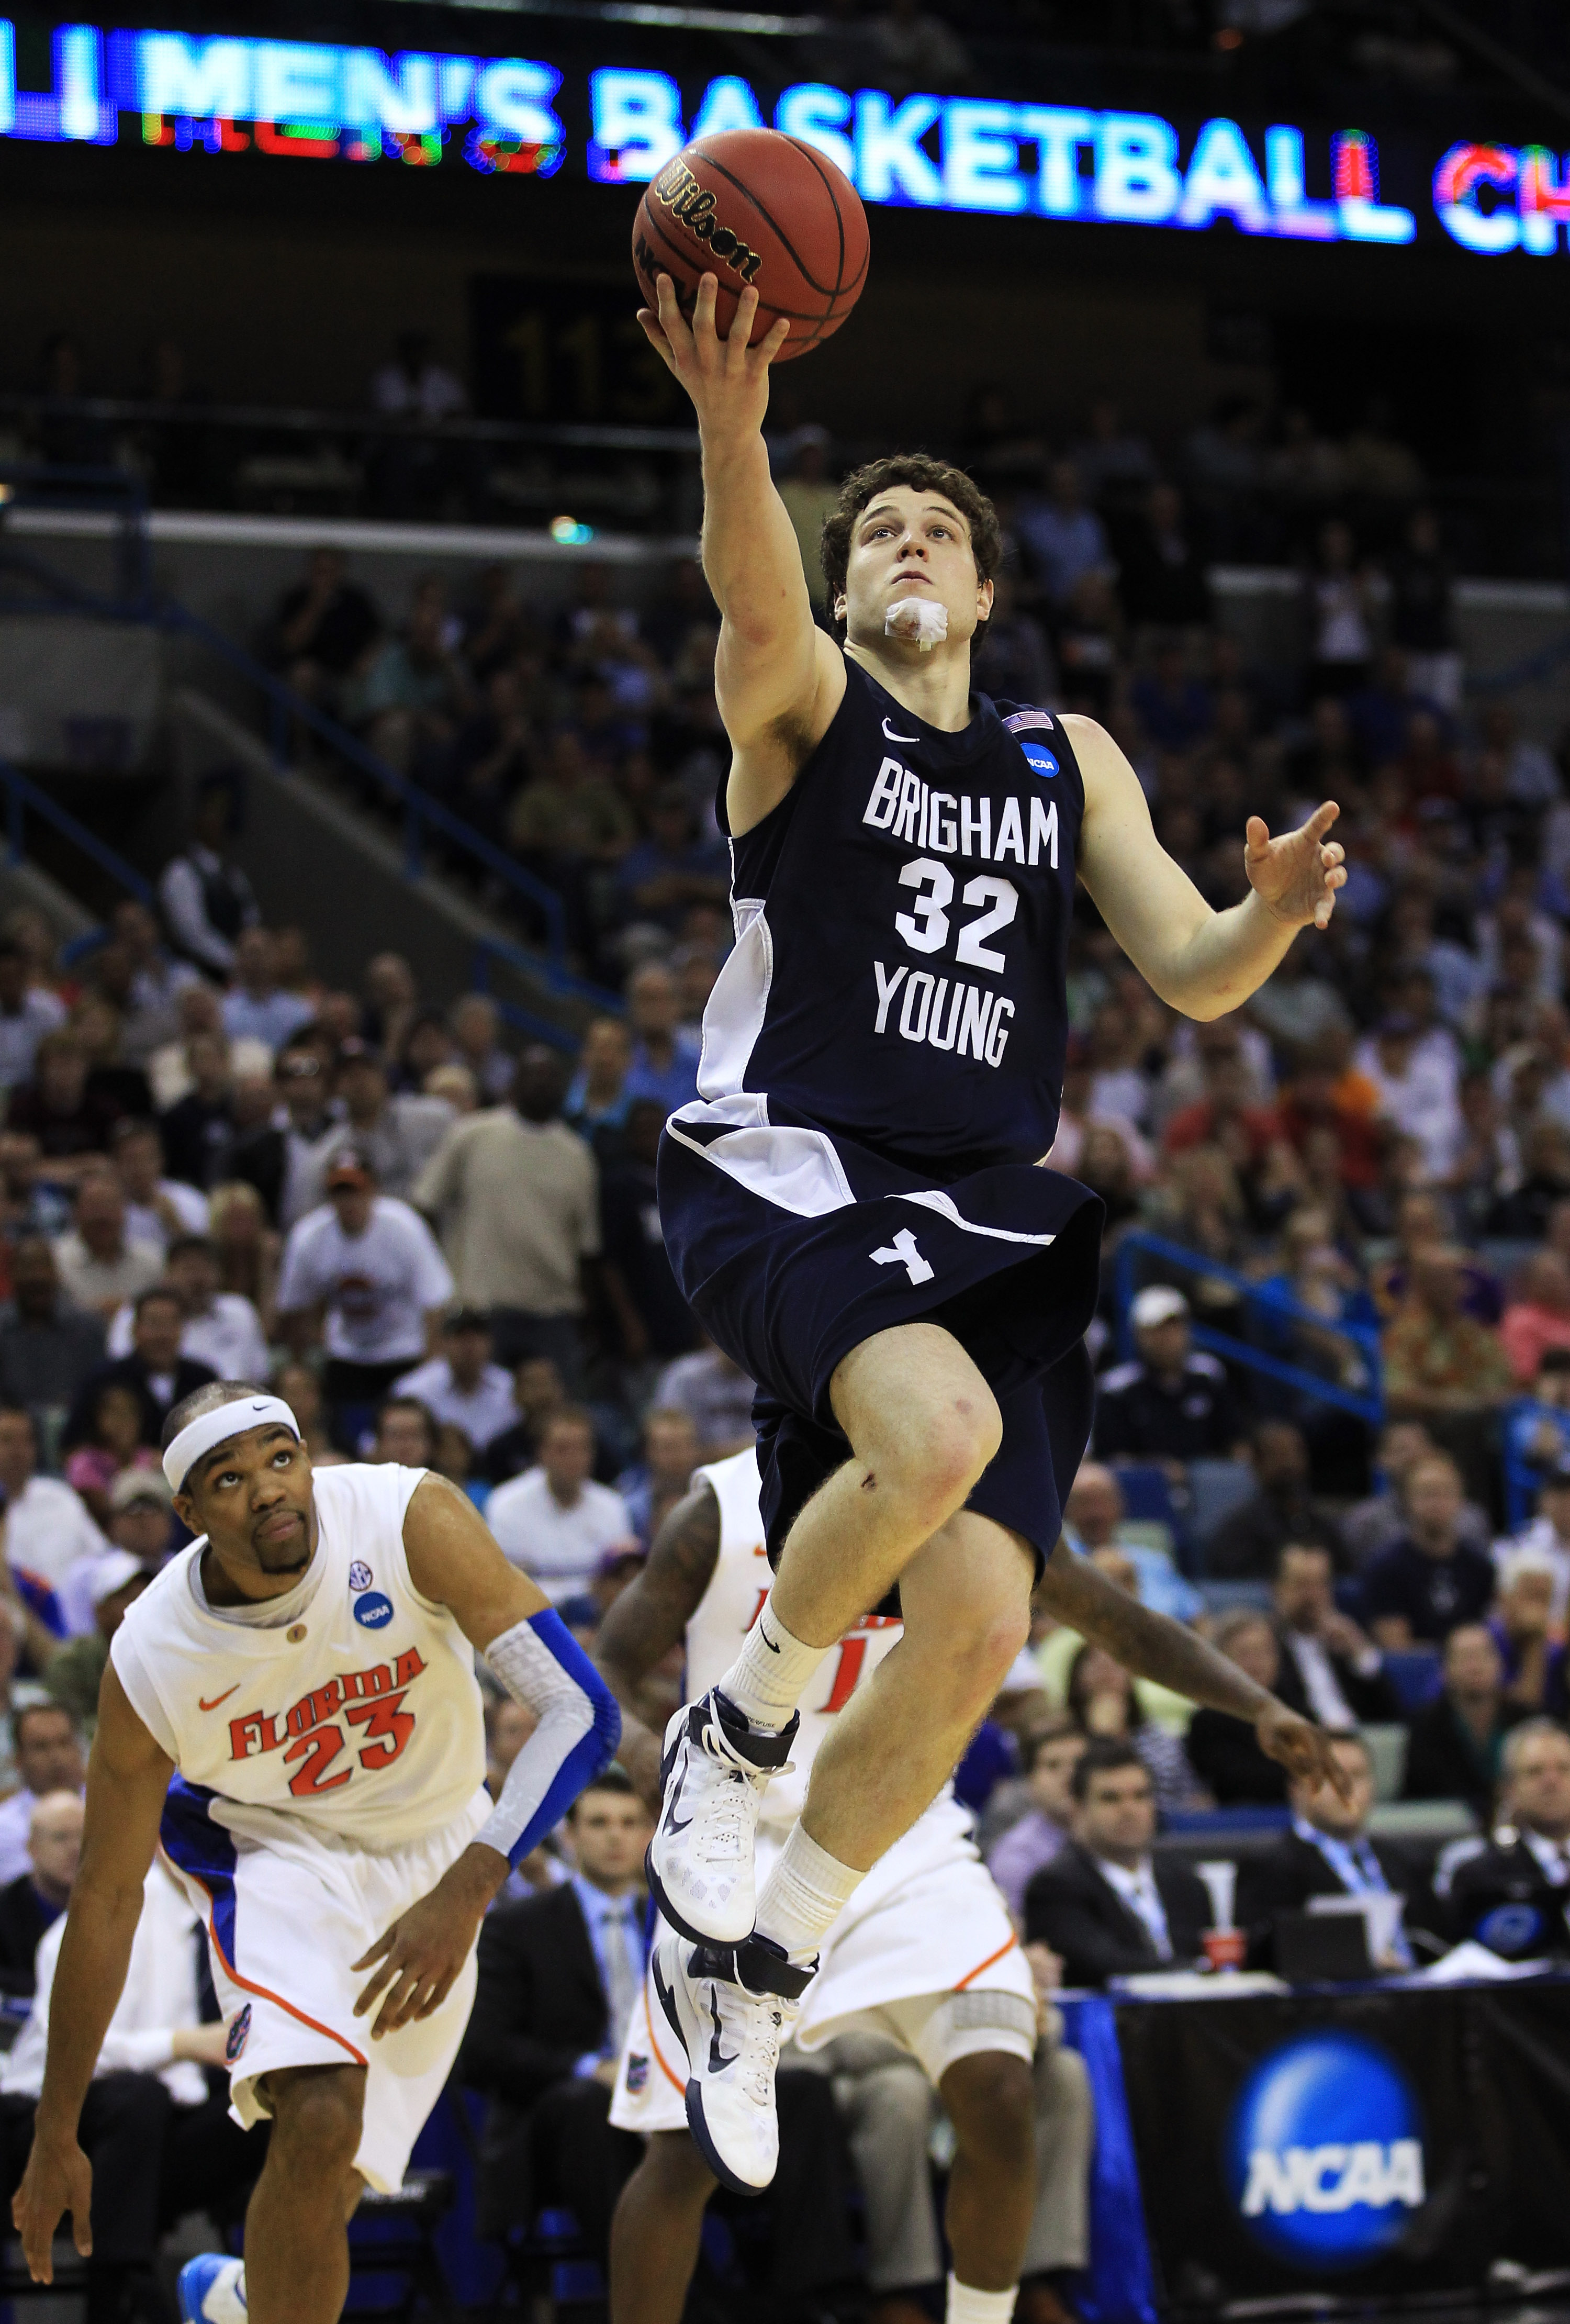 NEW ORLEANS, LA - MARCH 24:  Jimmer Fredette #32 of the Brigham Young Cougars shoots against the Florida Gators during the Southeast regional of the 2011 NCAA men's basketball tournament at New Orleans Arena on March 24, 2011 in New Orleans, Louisiana.  (